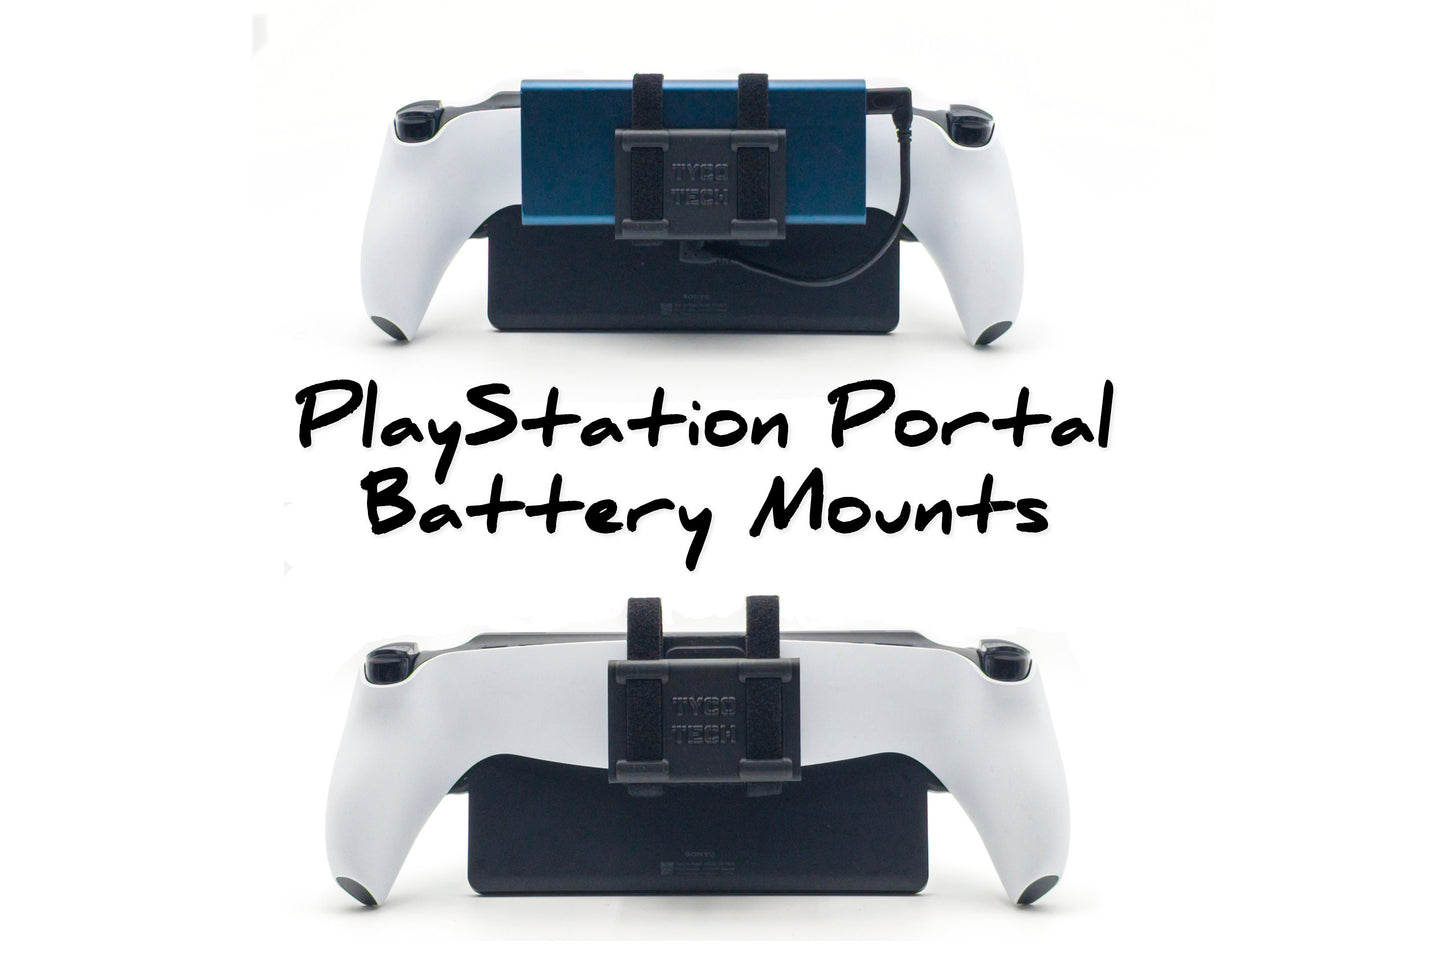 PlayStation Portal Universal Battery Mounts, Available in Three Sizes!